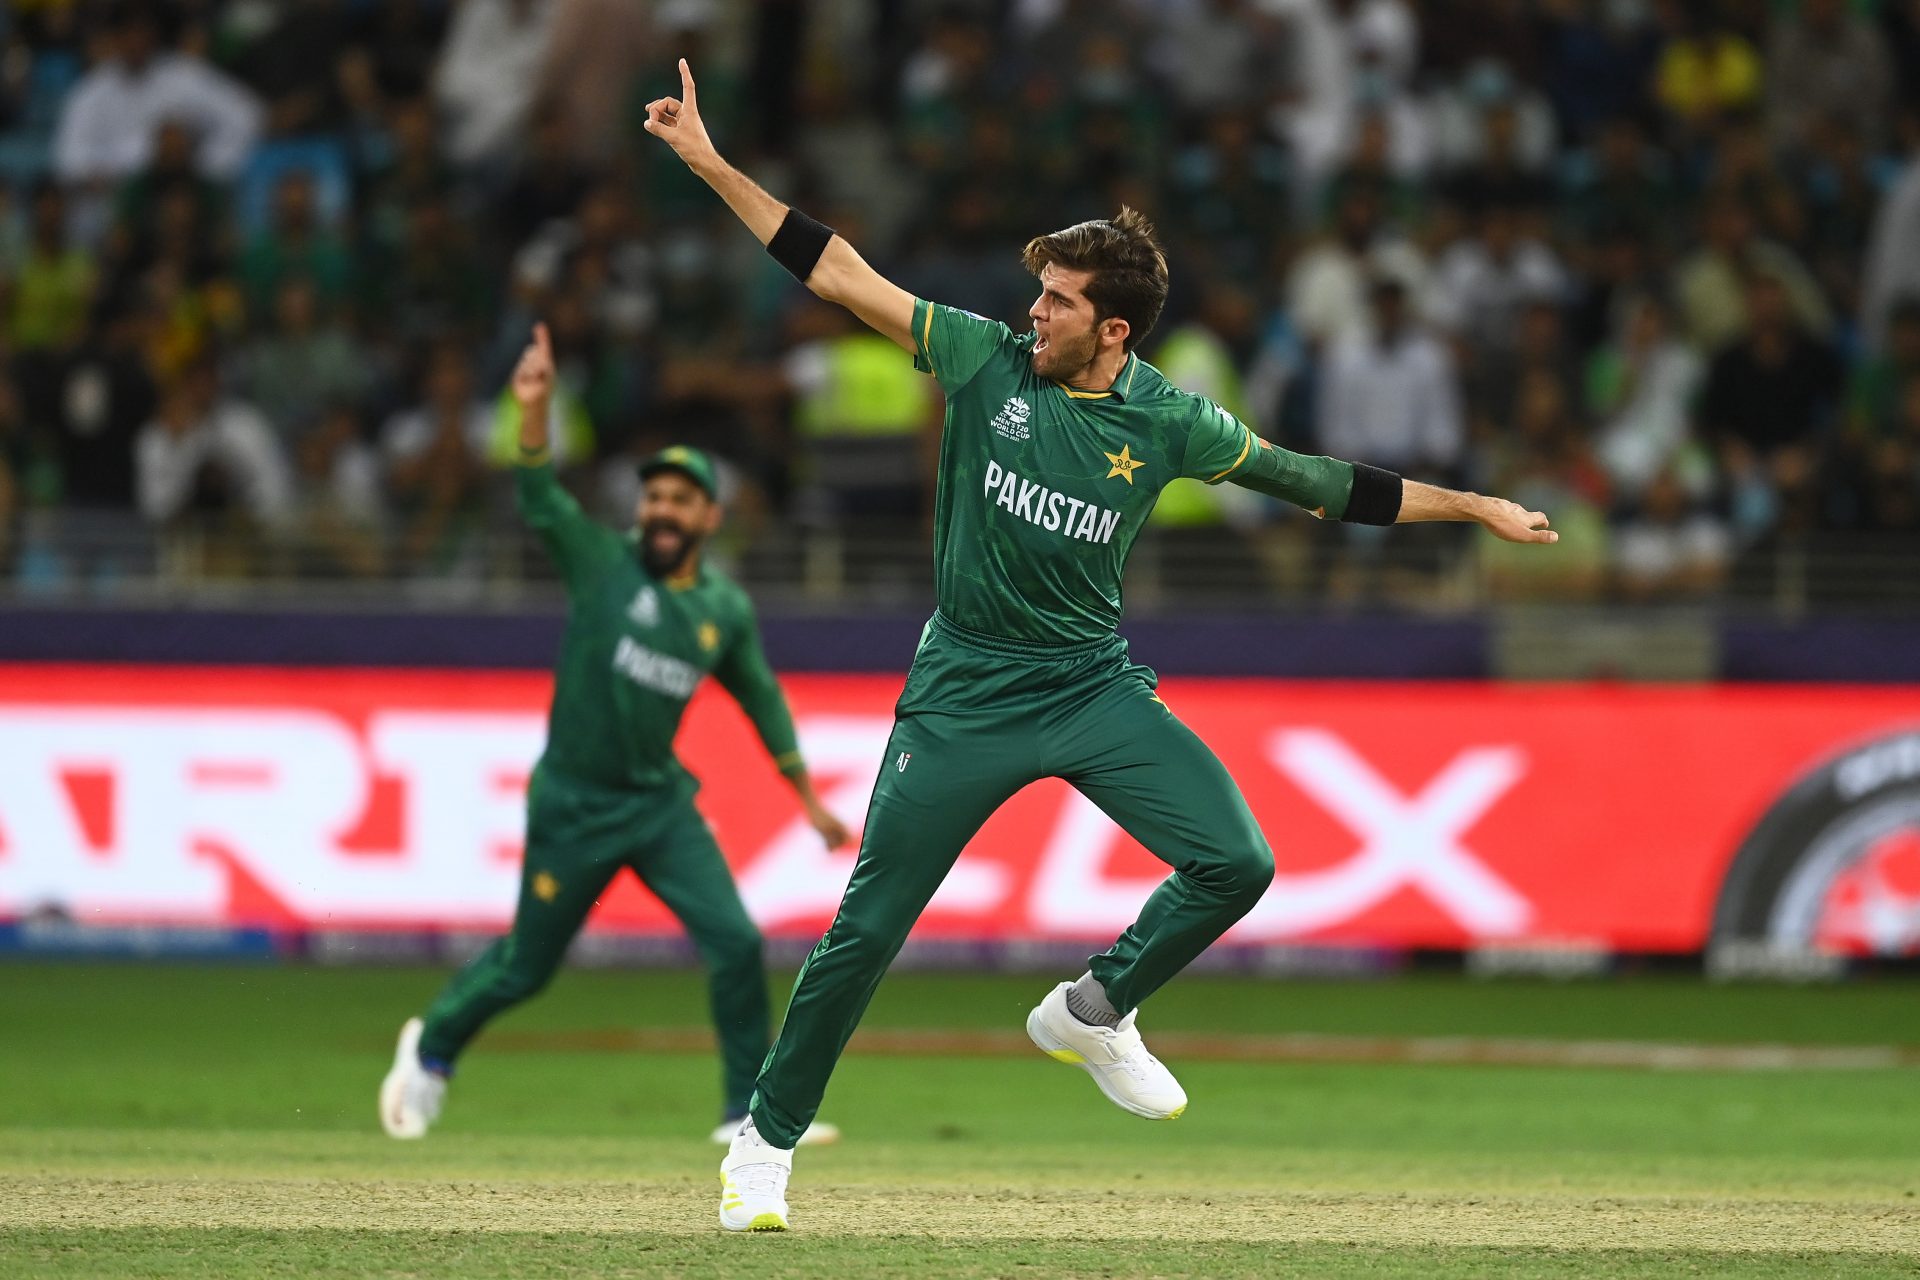 Players to watch: Shaheen Afridi